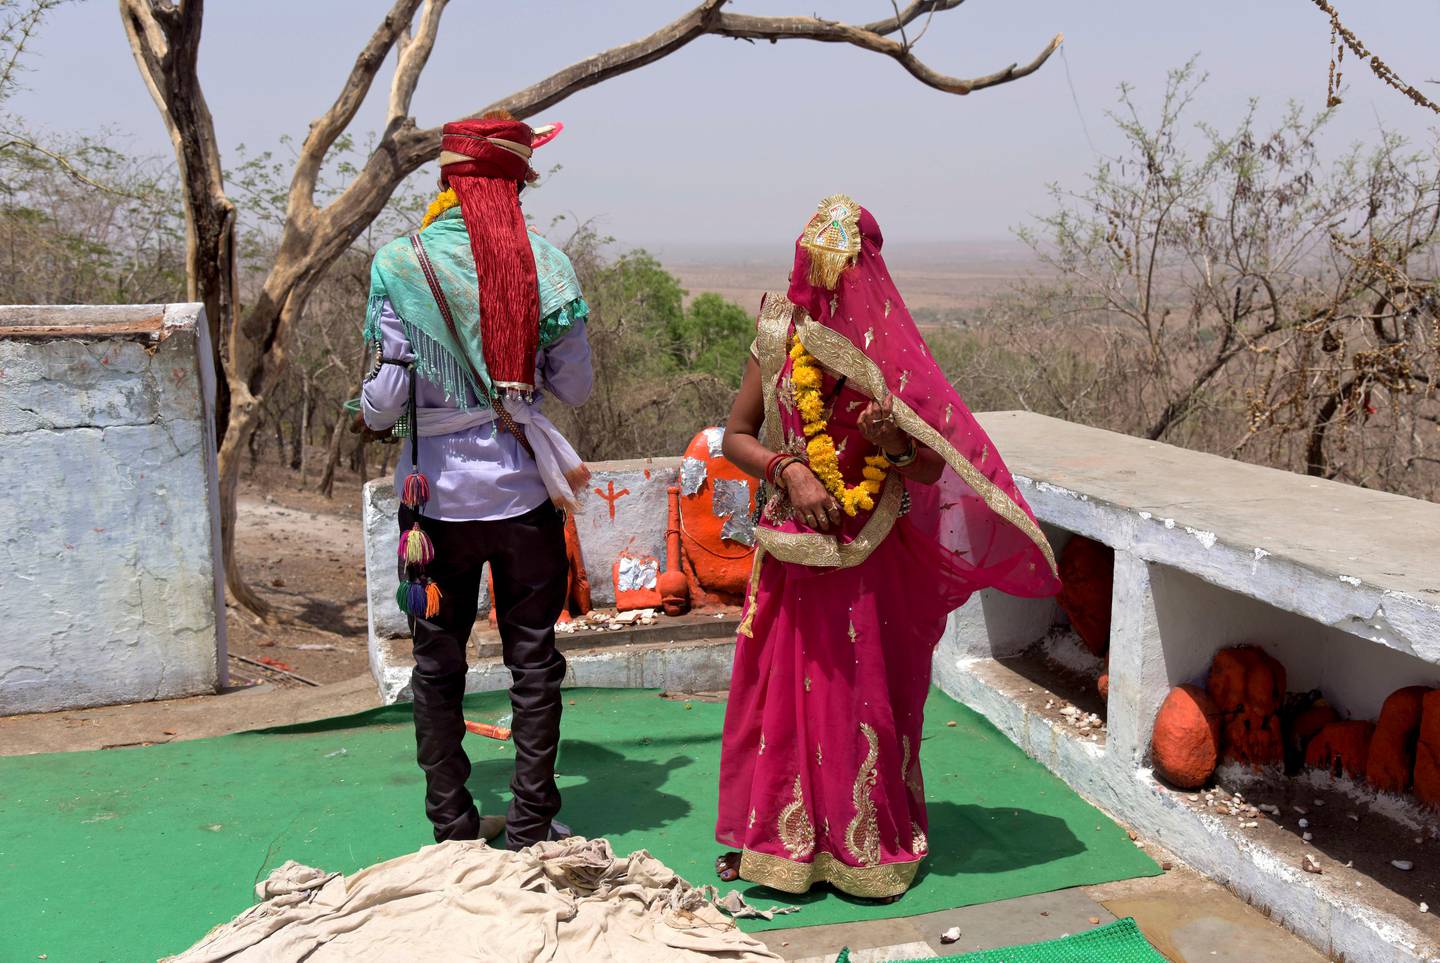 In this April 17, 2017 photograph, a child bride, who is only fourteen years old, right, performs rituals with the groom after getting married at a Hindu temple near Rajgarh, Madhya Pradesh state, India.  A significant fall in child marriages in South Asia has reduced the rate of marriage for girls globally, the U.N. children's agency said Tuesday. (AP Photo/Prakash Hatvalne)